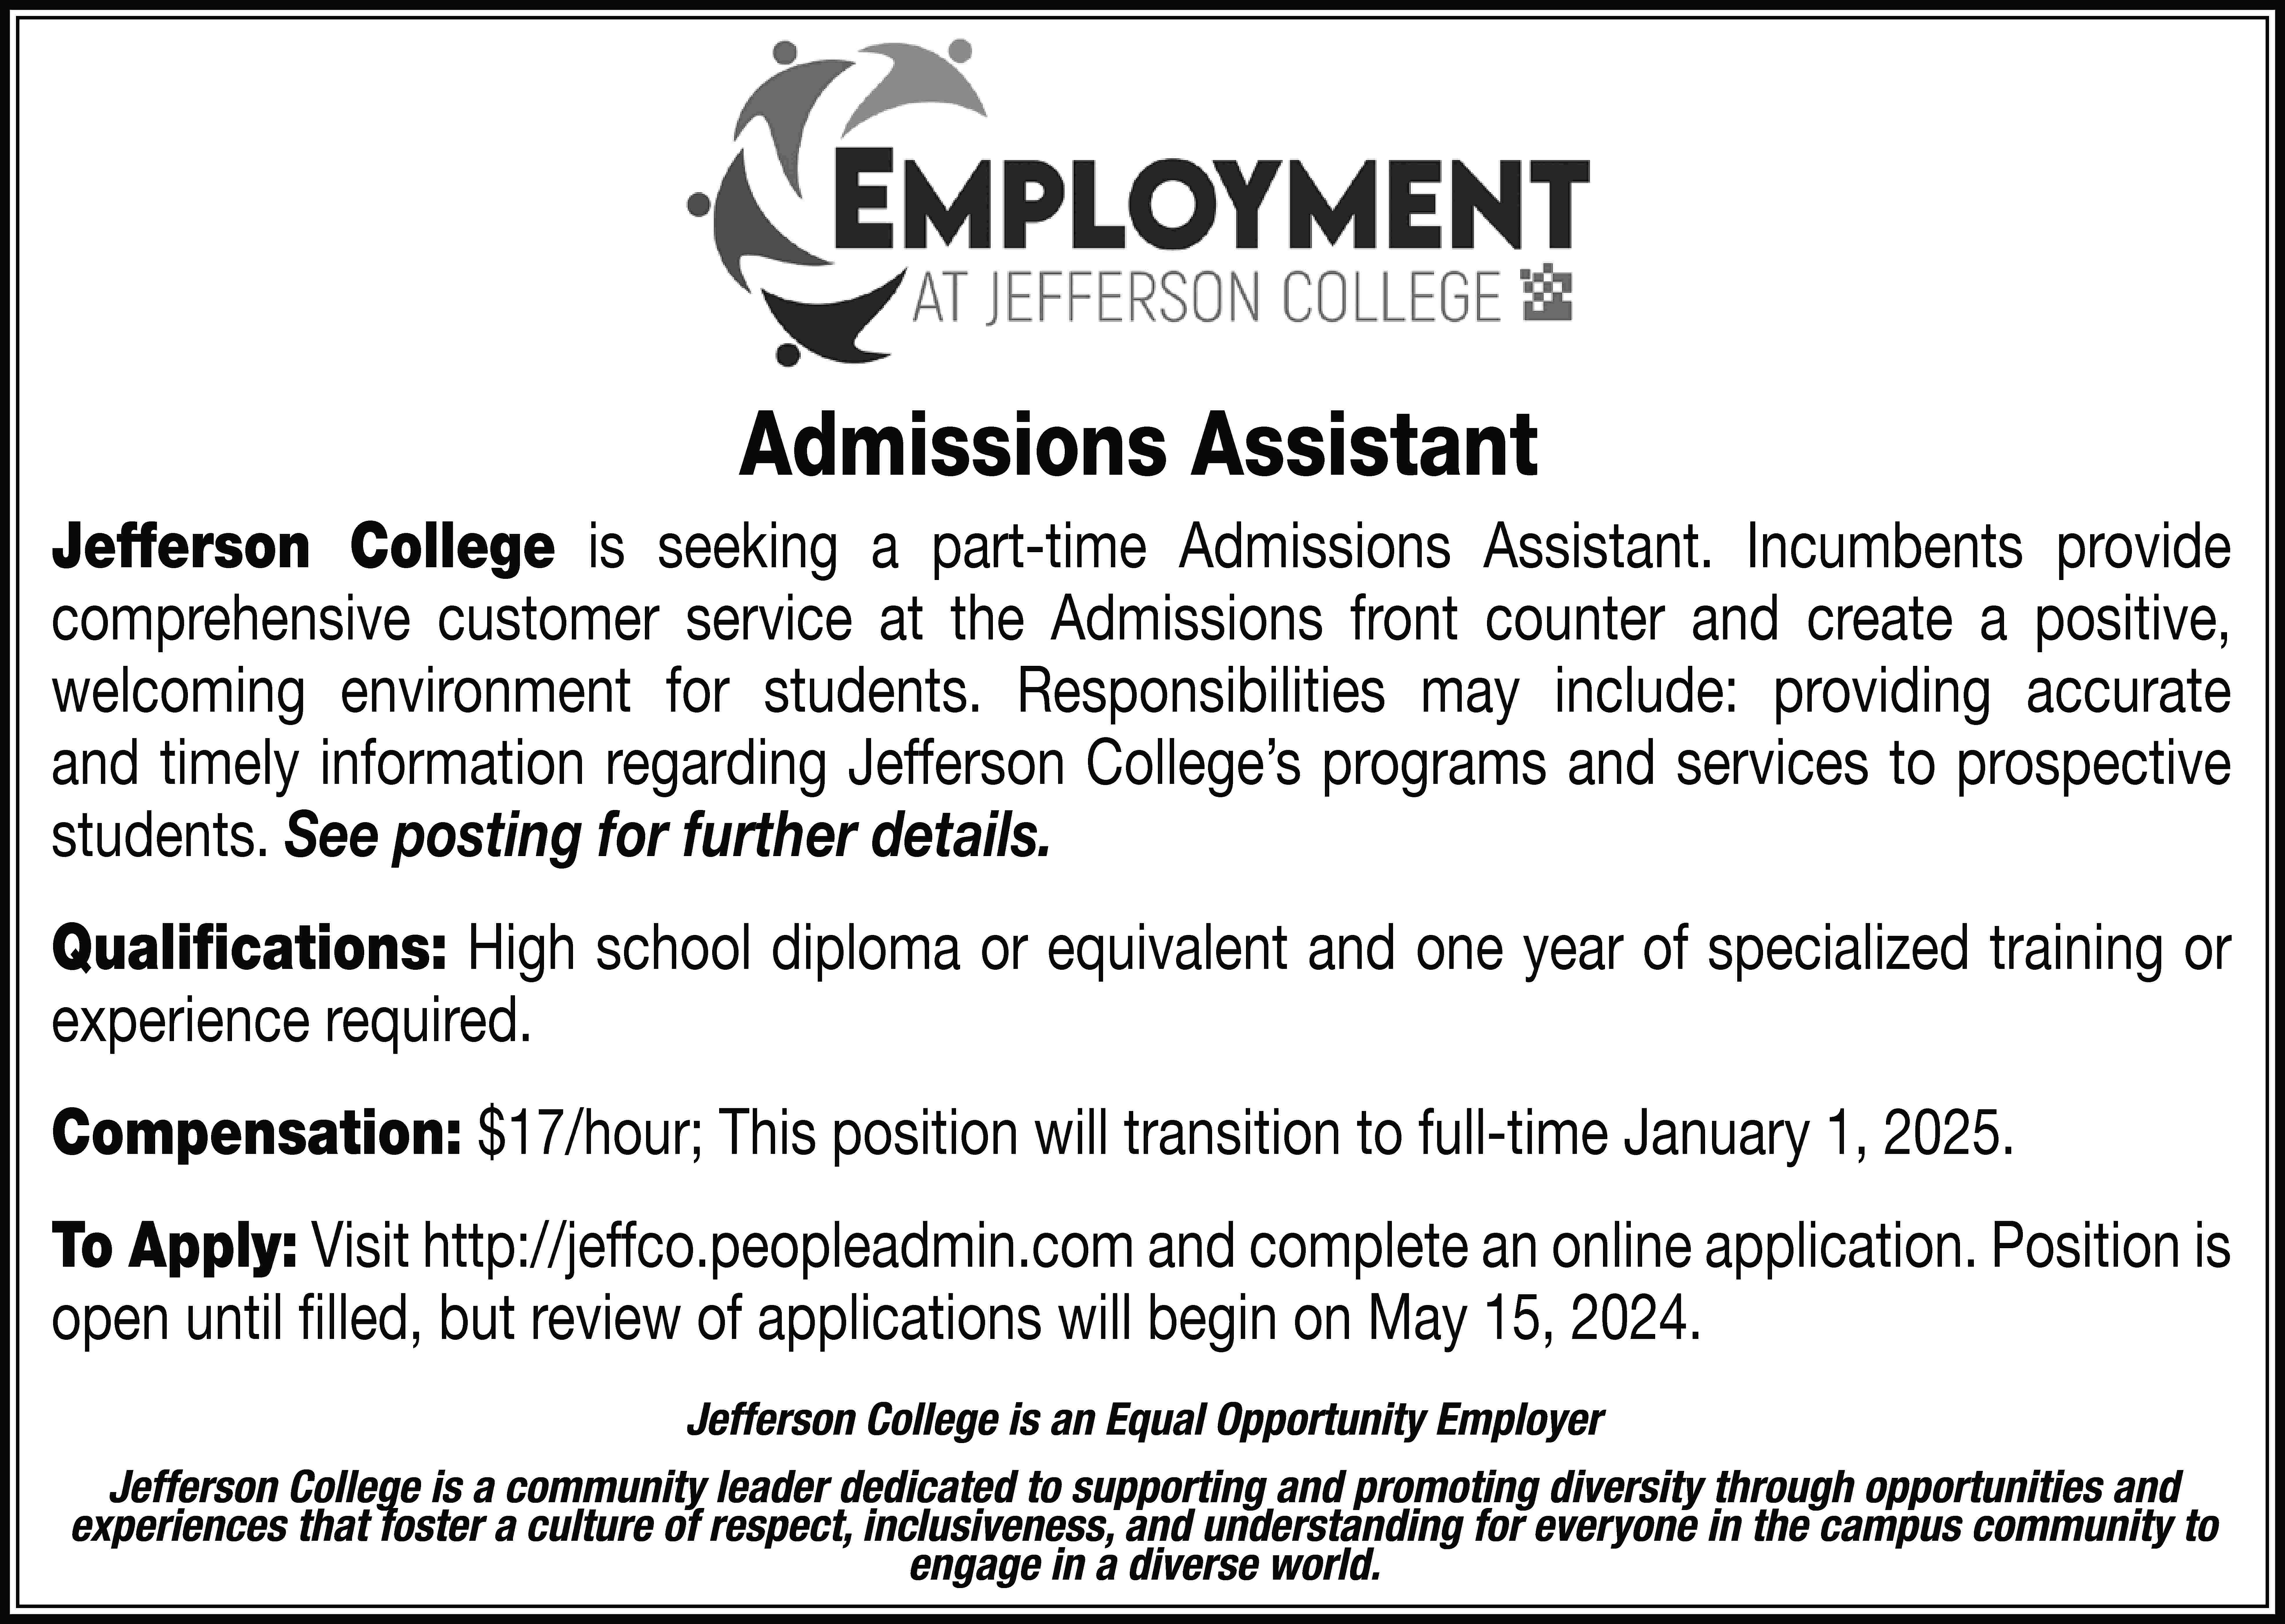 Admissions Assistant Jefferson College is  Admissions Assistant Jefferson College is seeking a part-time Admissions Assistant. Incumbents provide comprehensive customer service at the Admissions front counter and create a positive, welcoming environment for students. Responsibilities may include: providing accurate and timely information regarding Jefferson College’s programs and services to prospective students. See posting for further details. Qualifications: High school diploma or equivalent and one year of specialized training or experience required. Compensation: $17/hour; This position will transition to full-time January 1, 2025. To Apply: Visit http://jeffco.peopleadmin.com and complete an online application. Position is open until filled, but review of applications will begin on May 15, 2024. Jefferson College is an Equal Opportunity Employer Jefferson College is a community leader dedicated to supporting and promoting diversity through opportunities and experiences that foster a culture of respect, inclusiveness, and understanding for everyone in the campus community to engage in a diverse world.